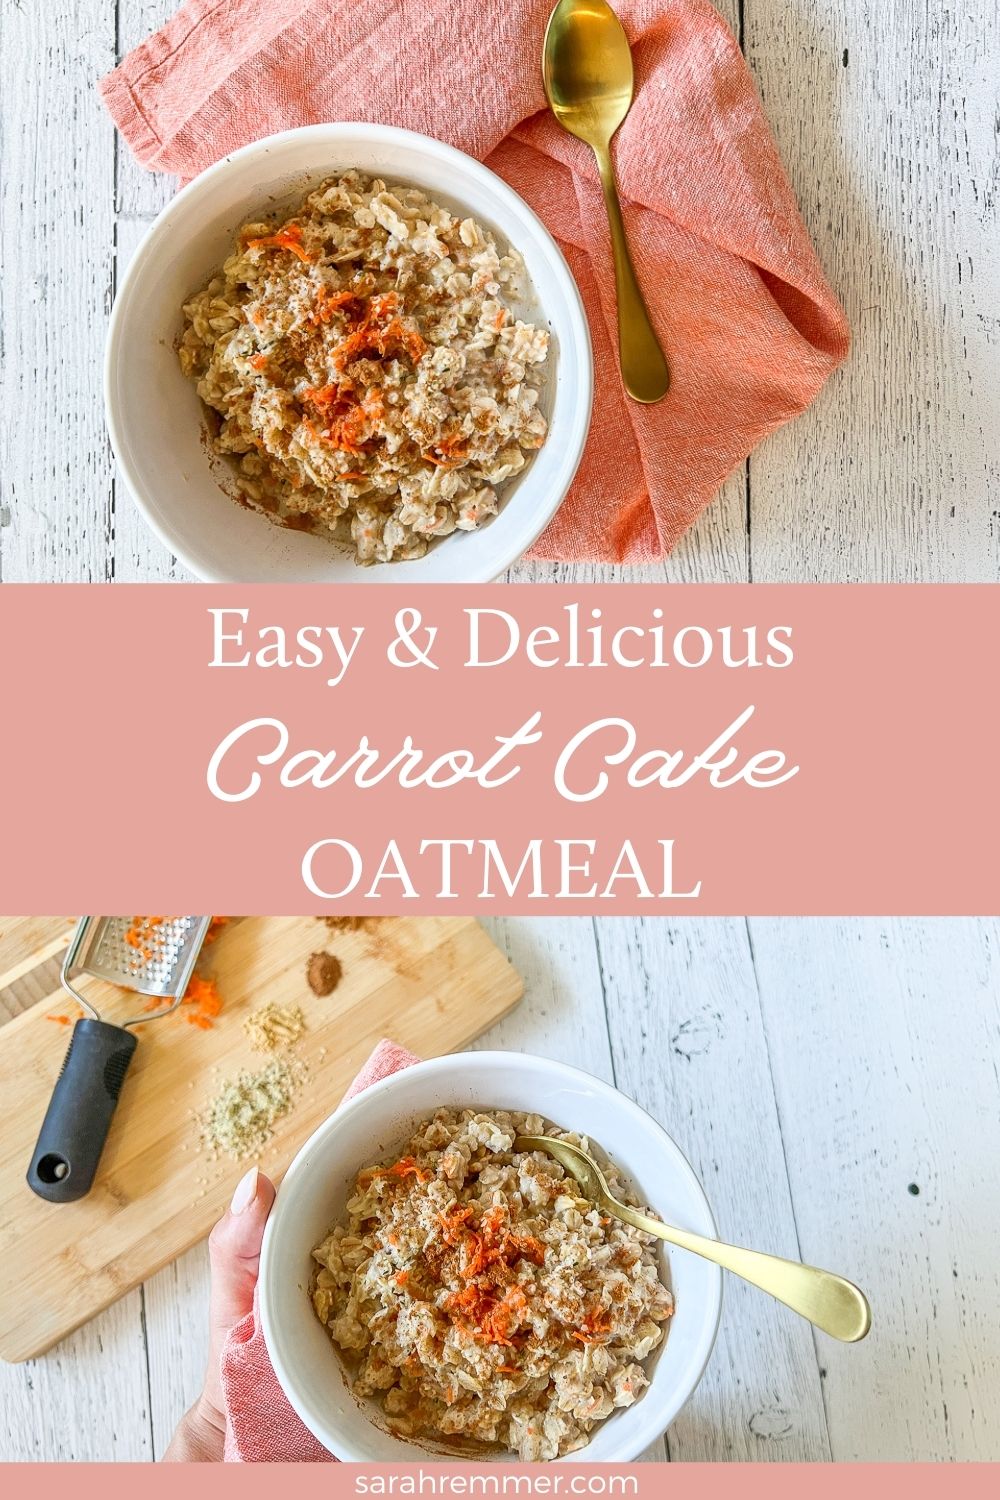 You can make this yummy carrot cake oatmeal ahead of time, or the morning of (because it’s THAT versatile and easy!). It’s dietitian-approved and tastes like carrot cake – what’s better than that?! Oh, your kids will love it too. Boom! 